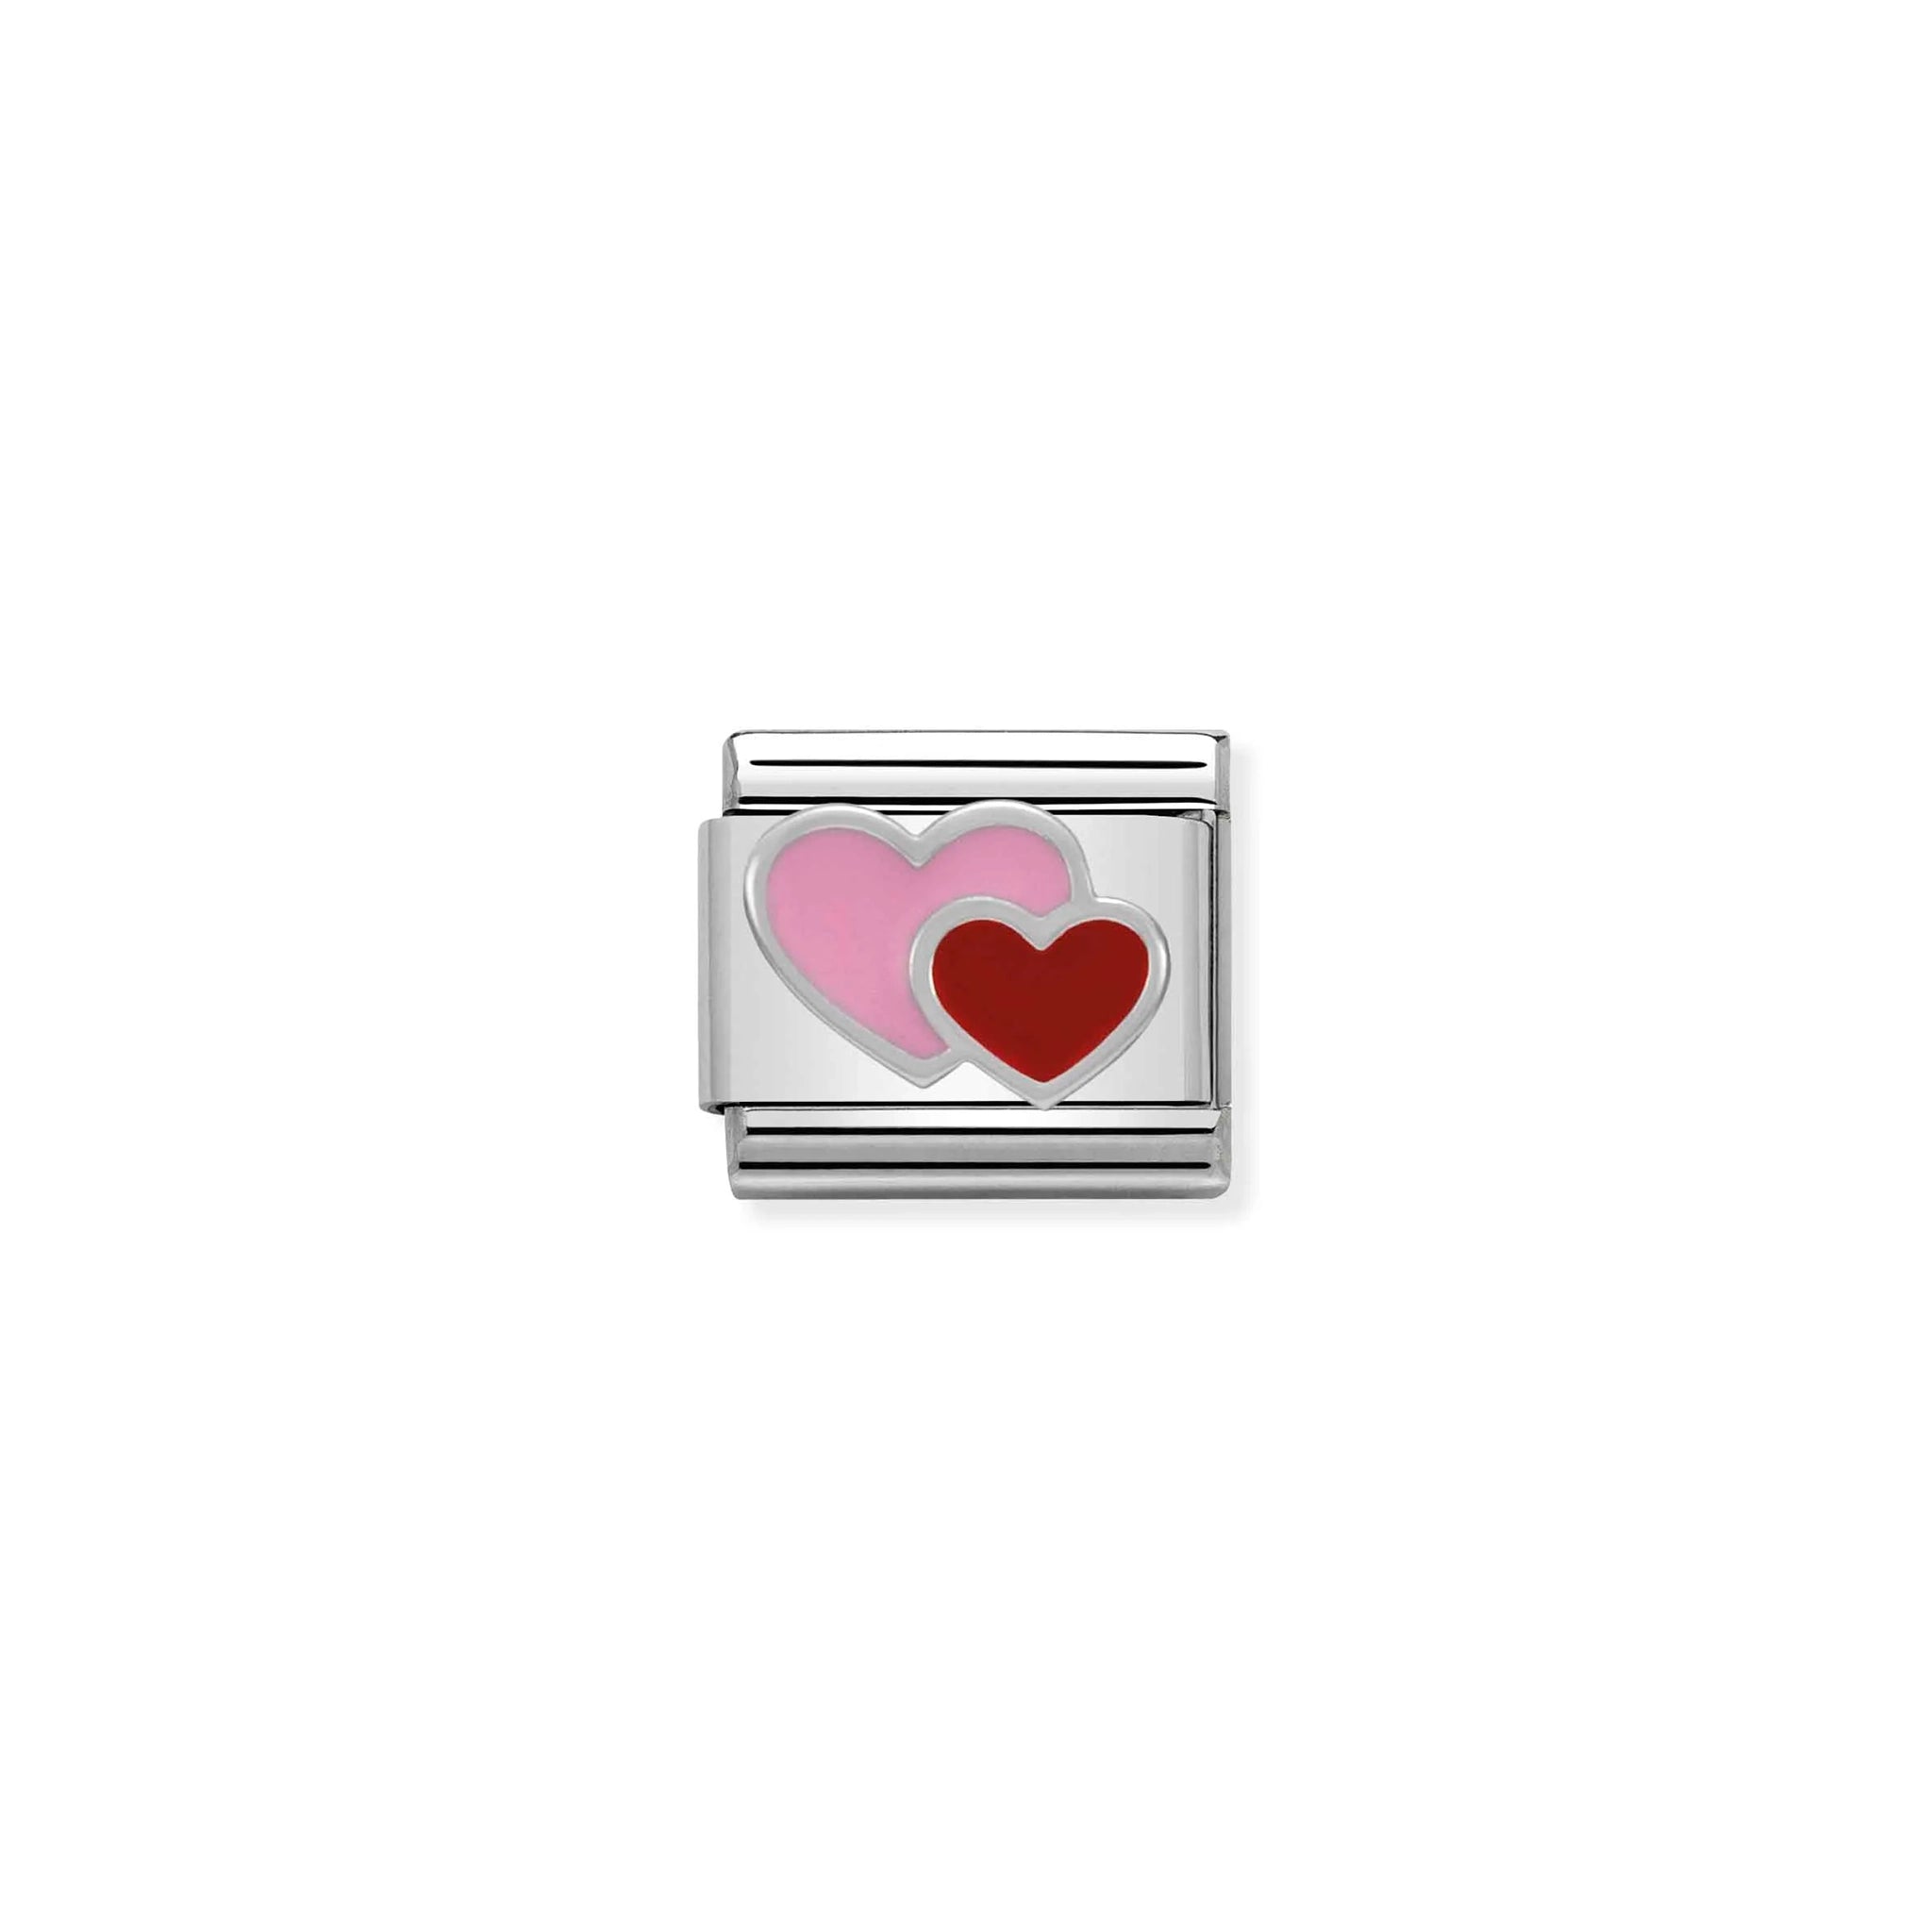 Nomination charm featuring two silver hearts in pink and red enamel